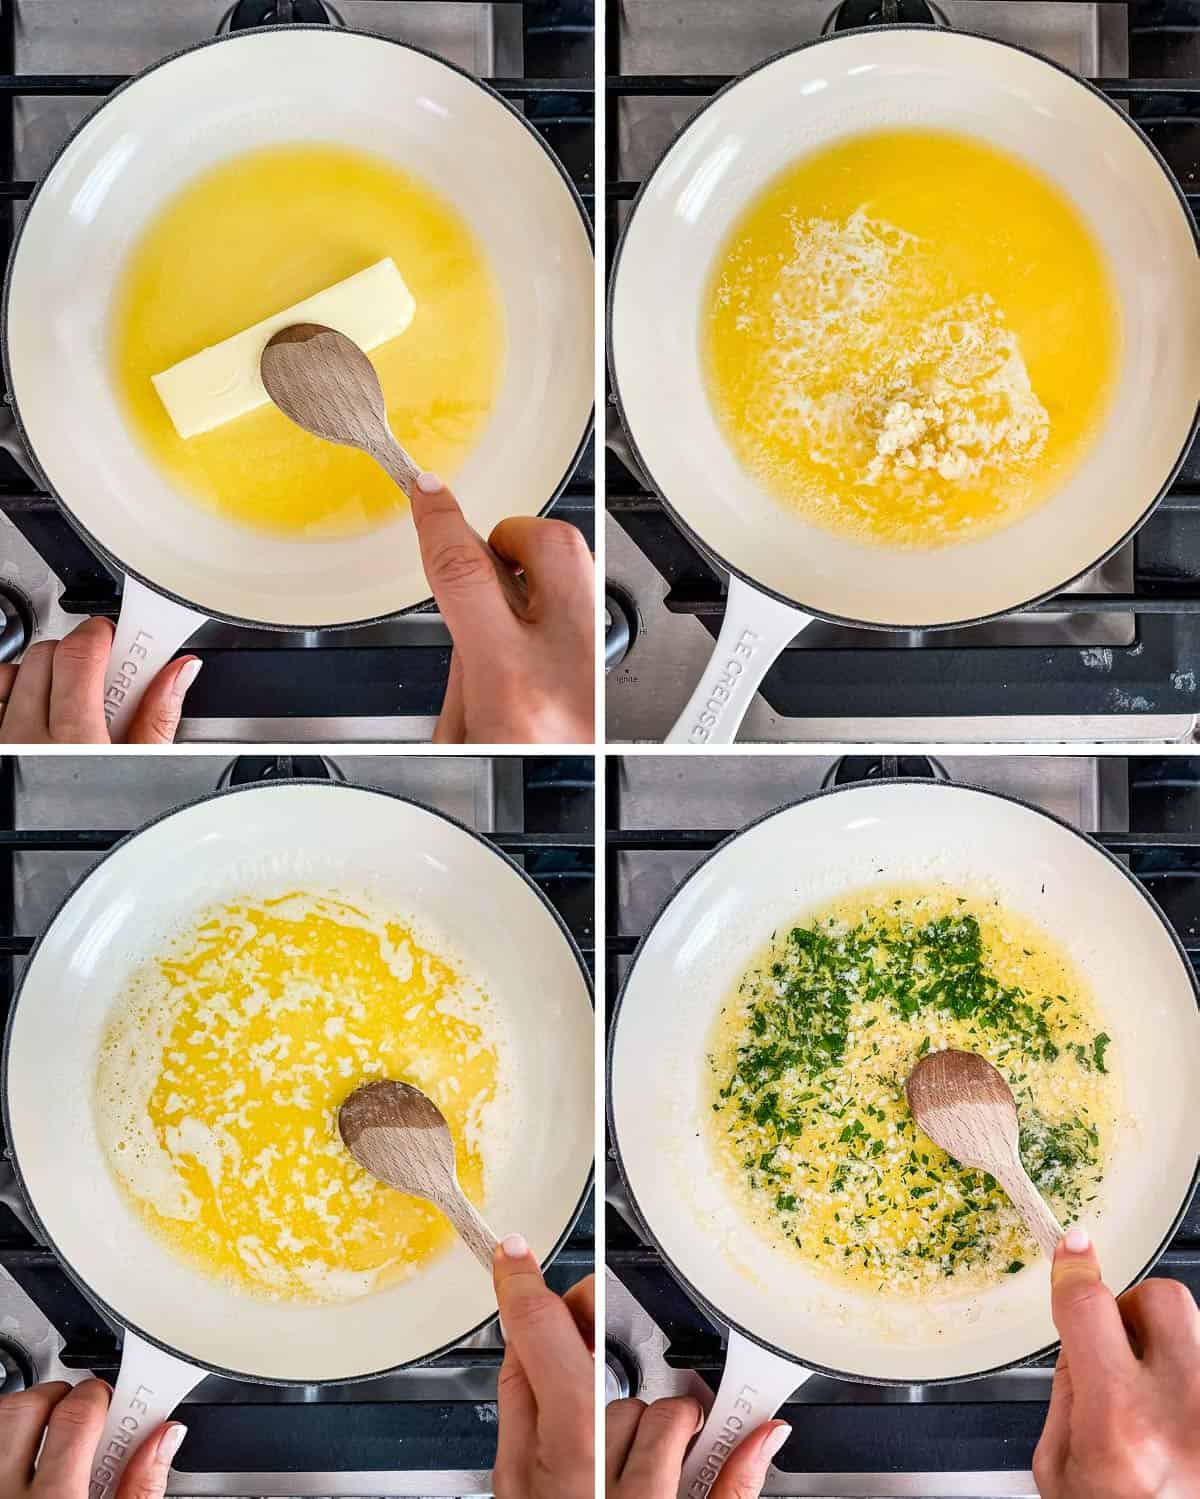 A collage of images showing how to make a garlic butter sauce.